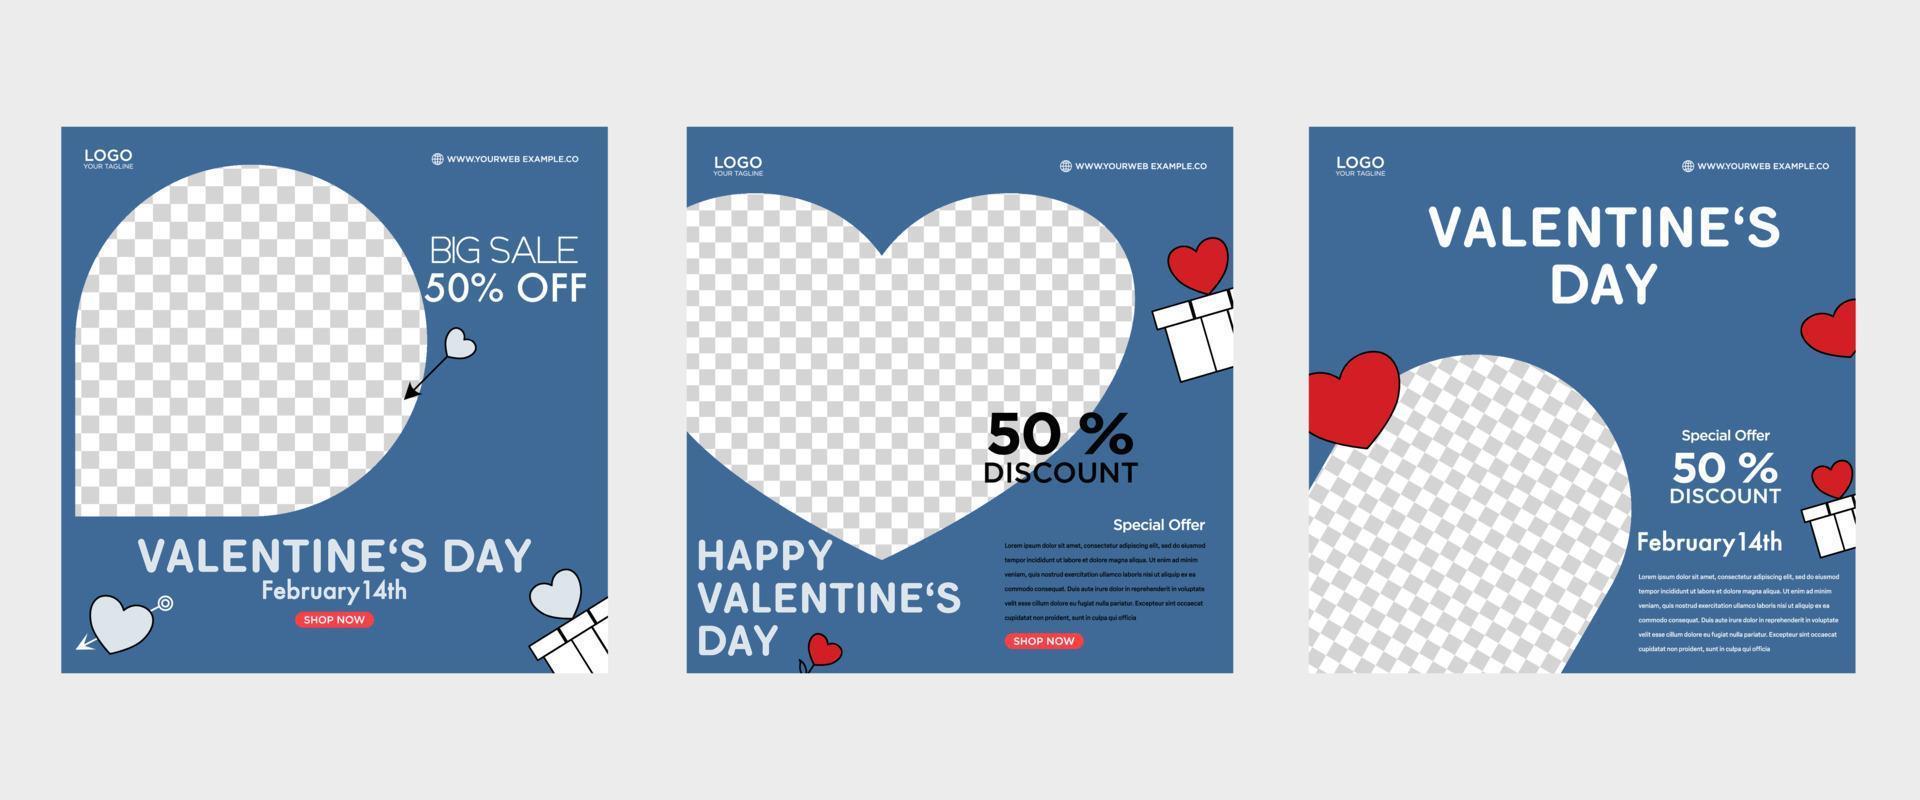 Valentine square banner design template set. Red background with love line frame. Can be used for social media posts, greeting cards, banners and web ads. vector